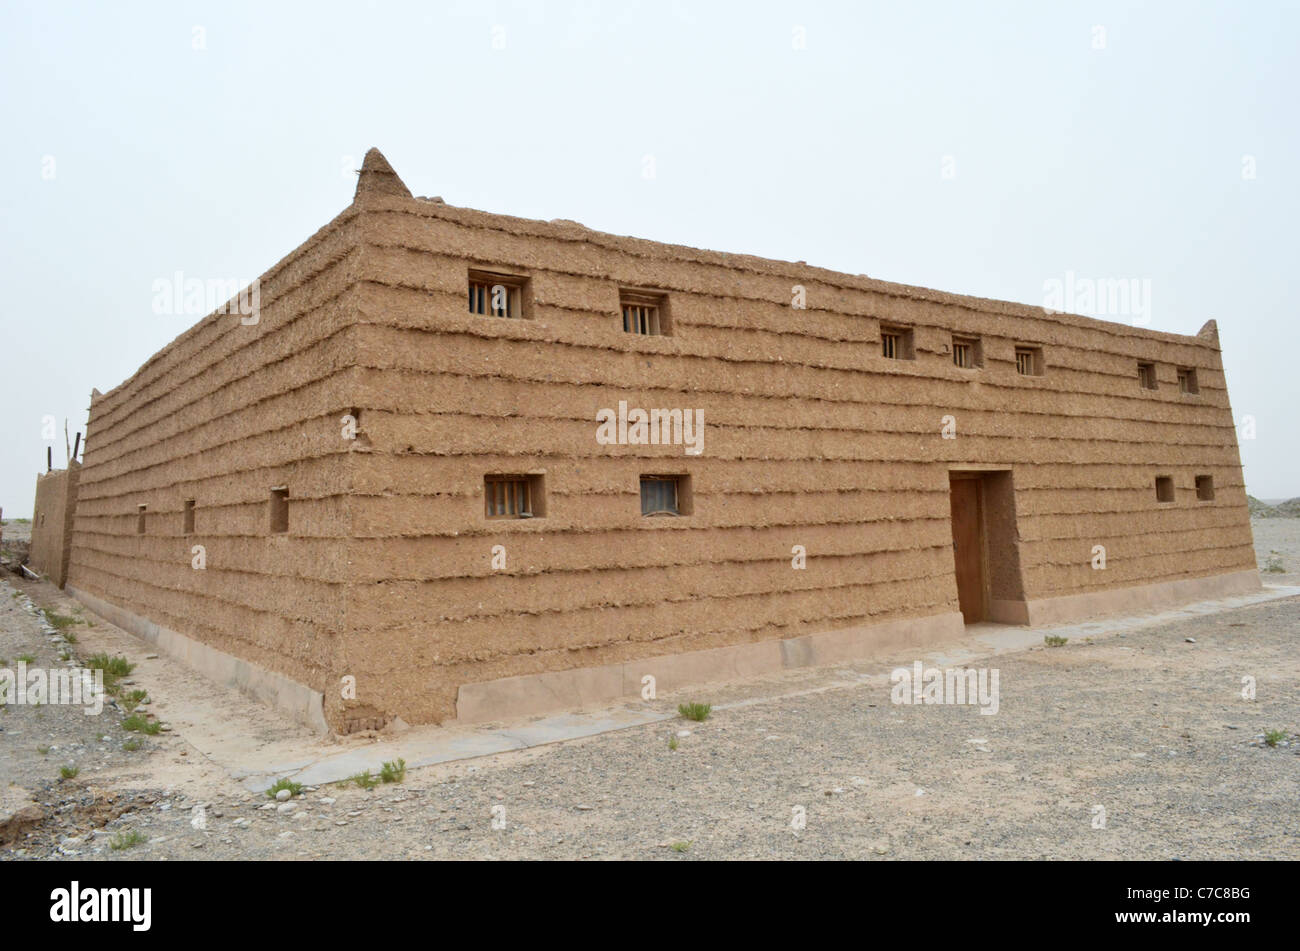 A modern house built in the traditional manner, using rammed earth layered with straw or reeds, Dunhuang, Gansu, China Stock Photo